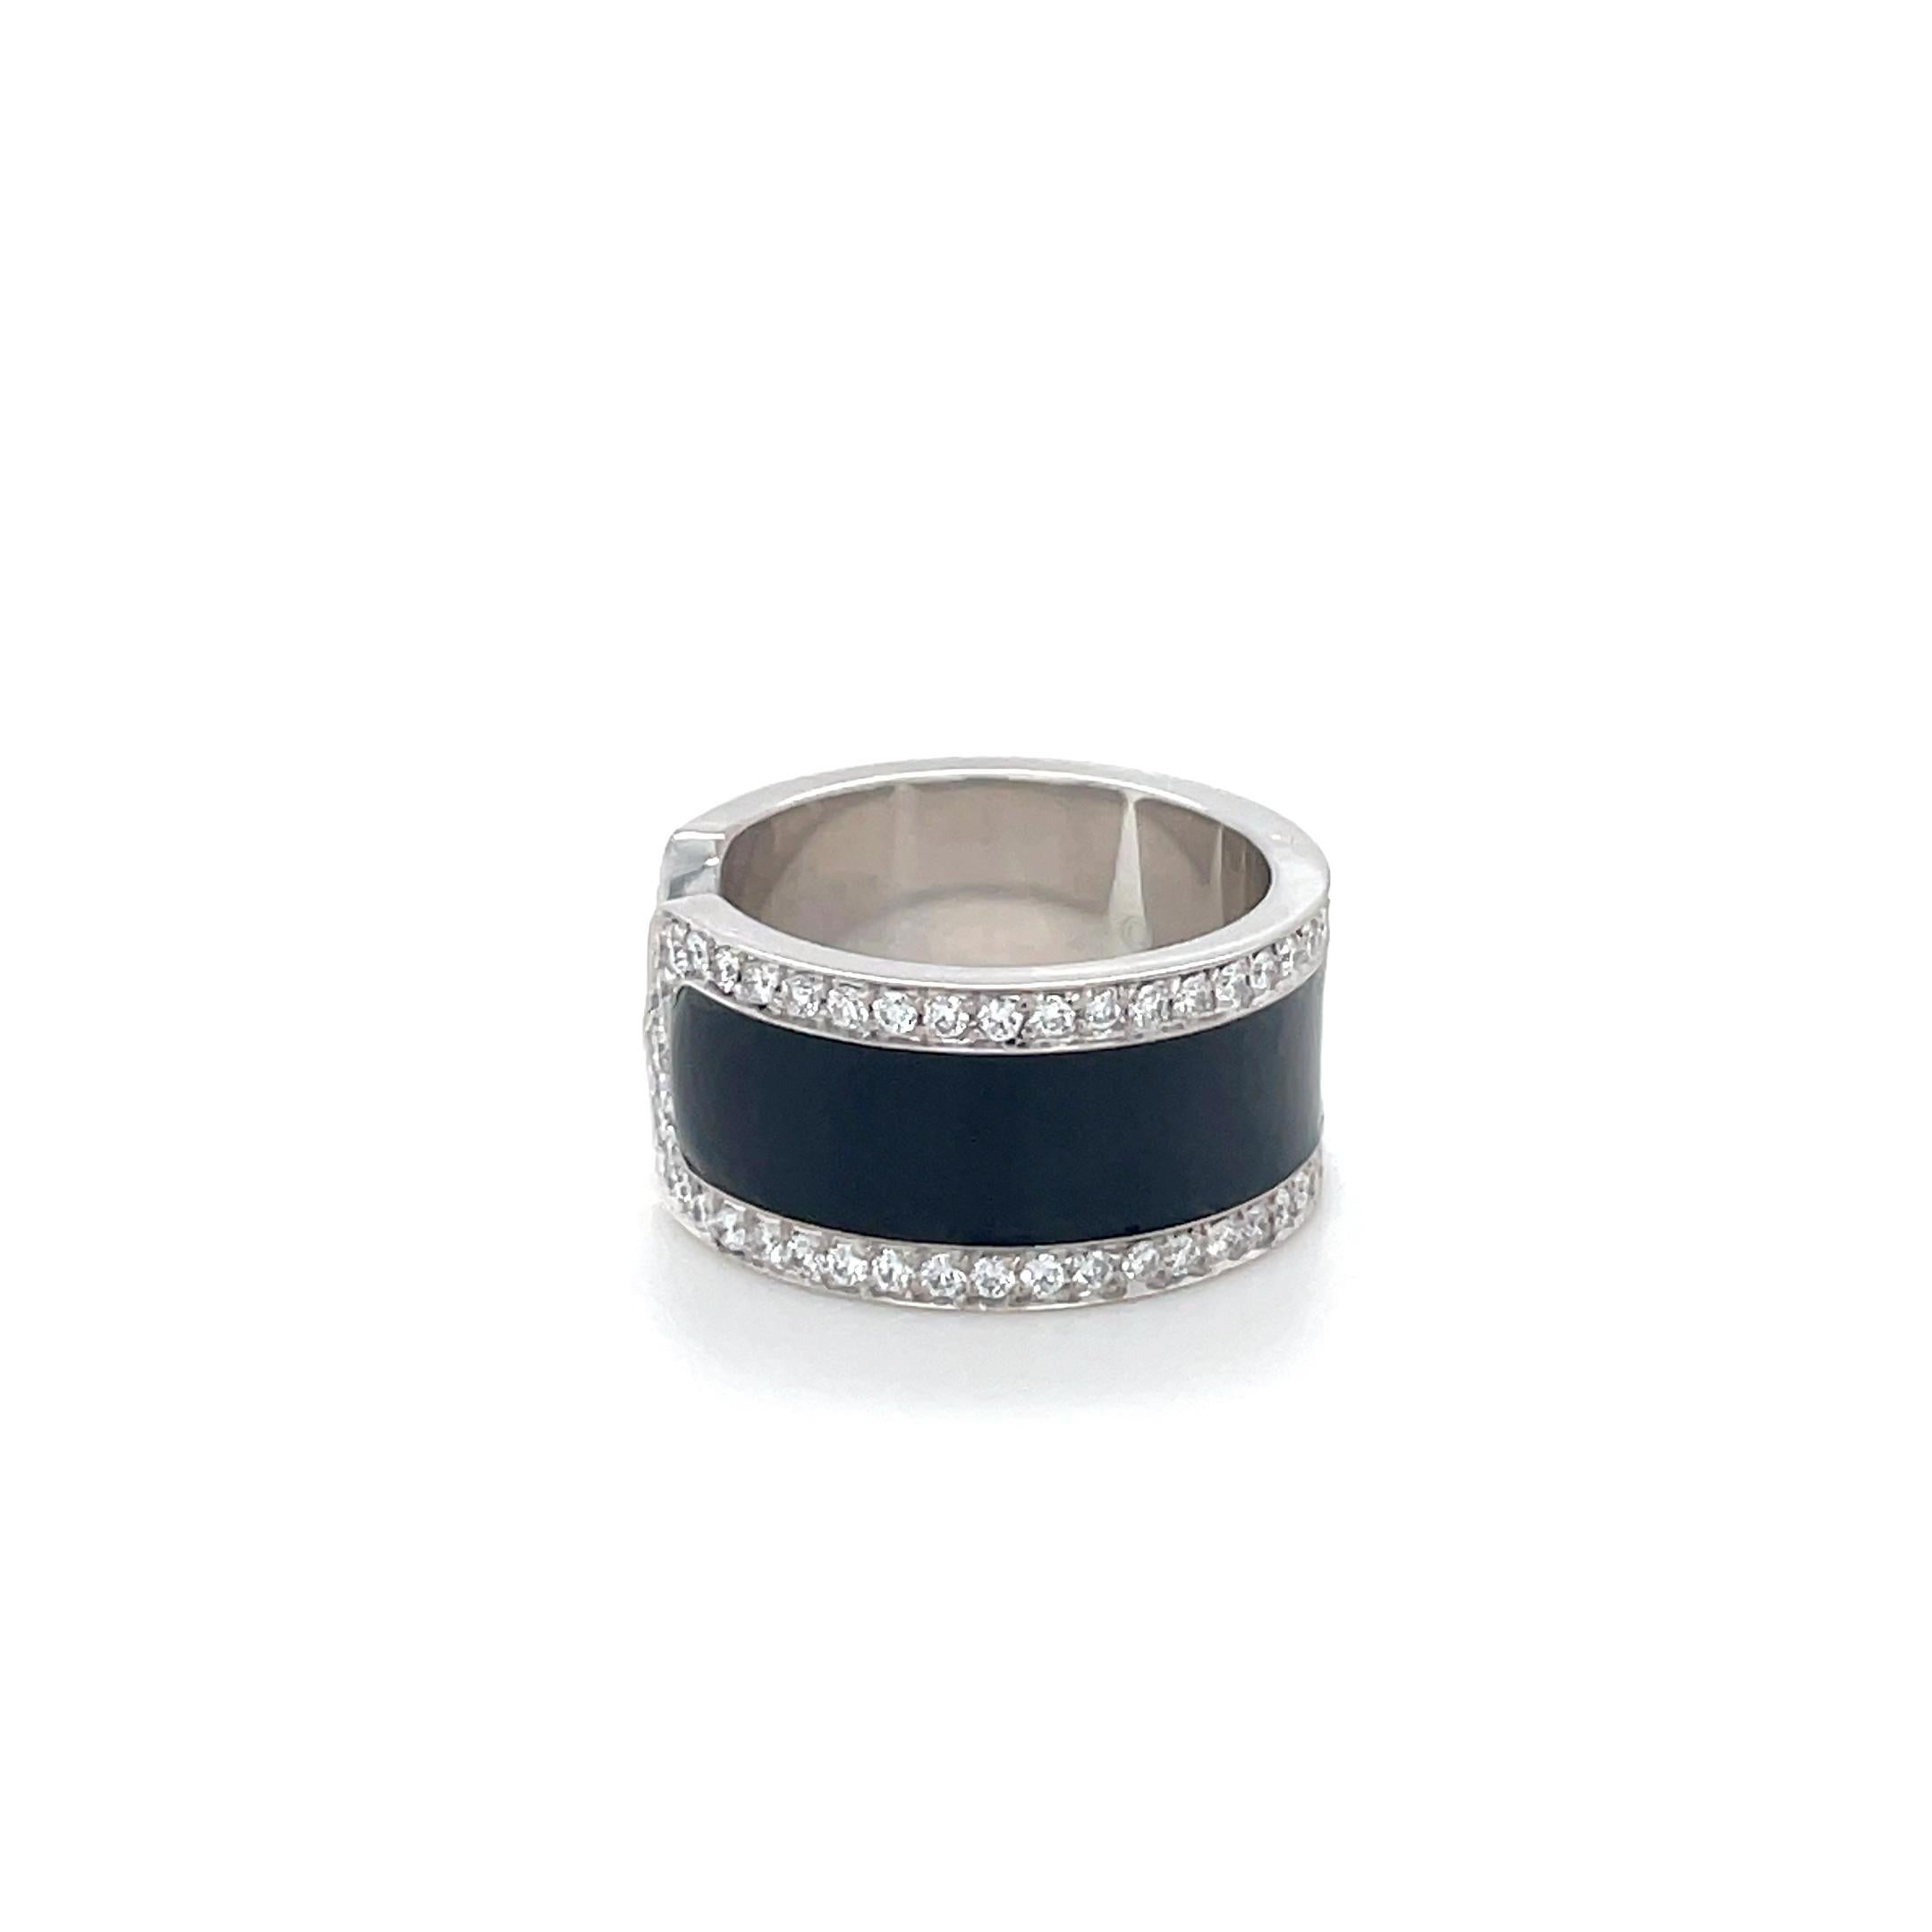 In a double C design, this classic Cartier ring contains 80 top quality round brilliant cut diamonds weighing approximately 1.50 carats total with a black enameled center. 

Ring size 6 (52)
Stamp: C Cartier 0J4368 750 52 (French maker's